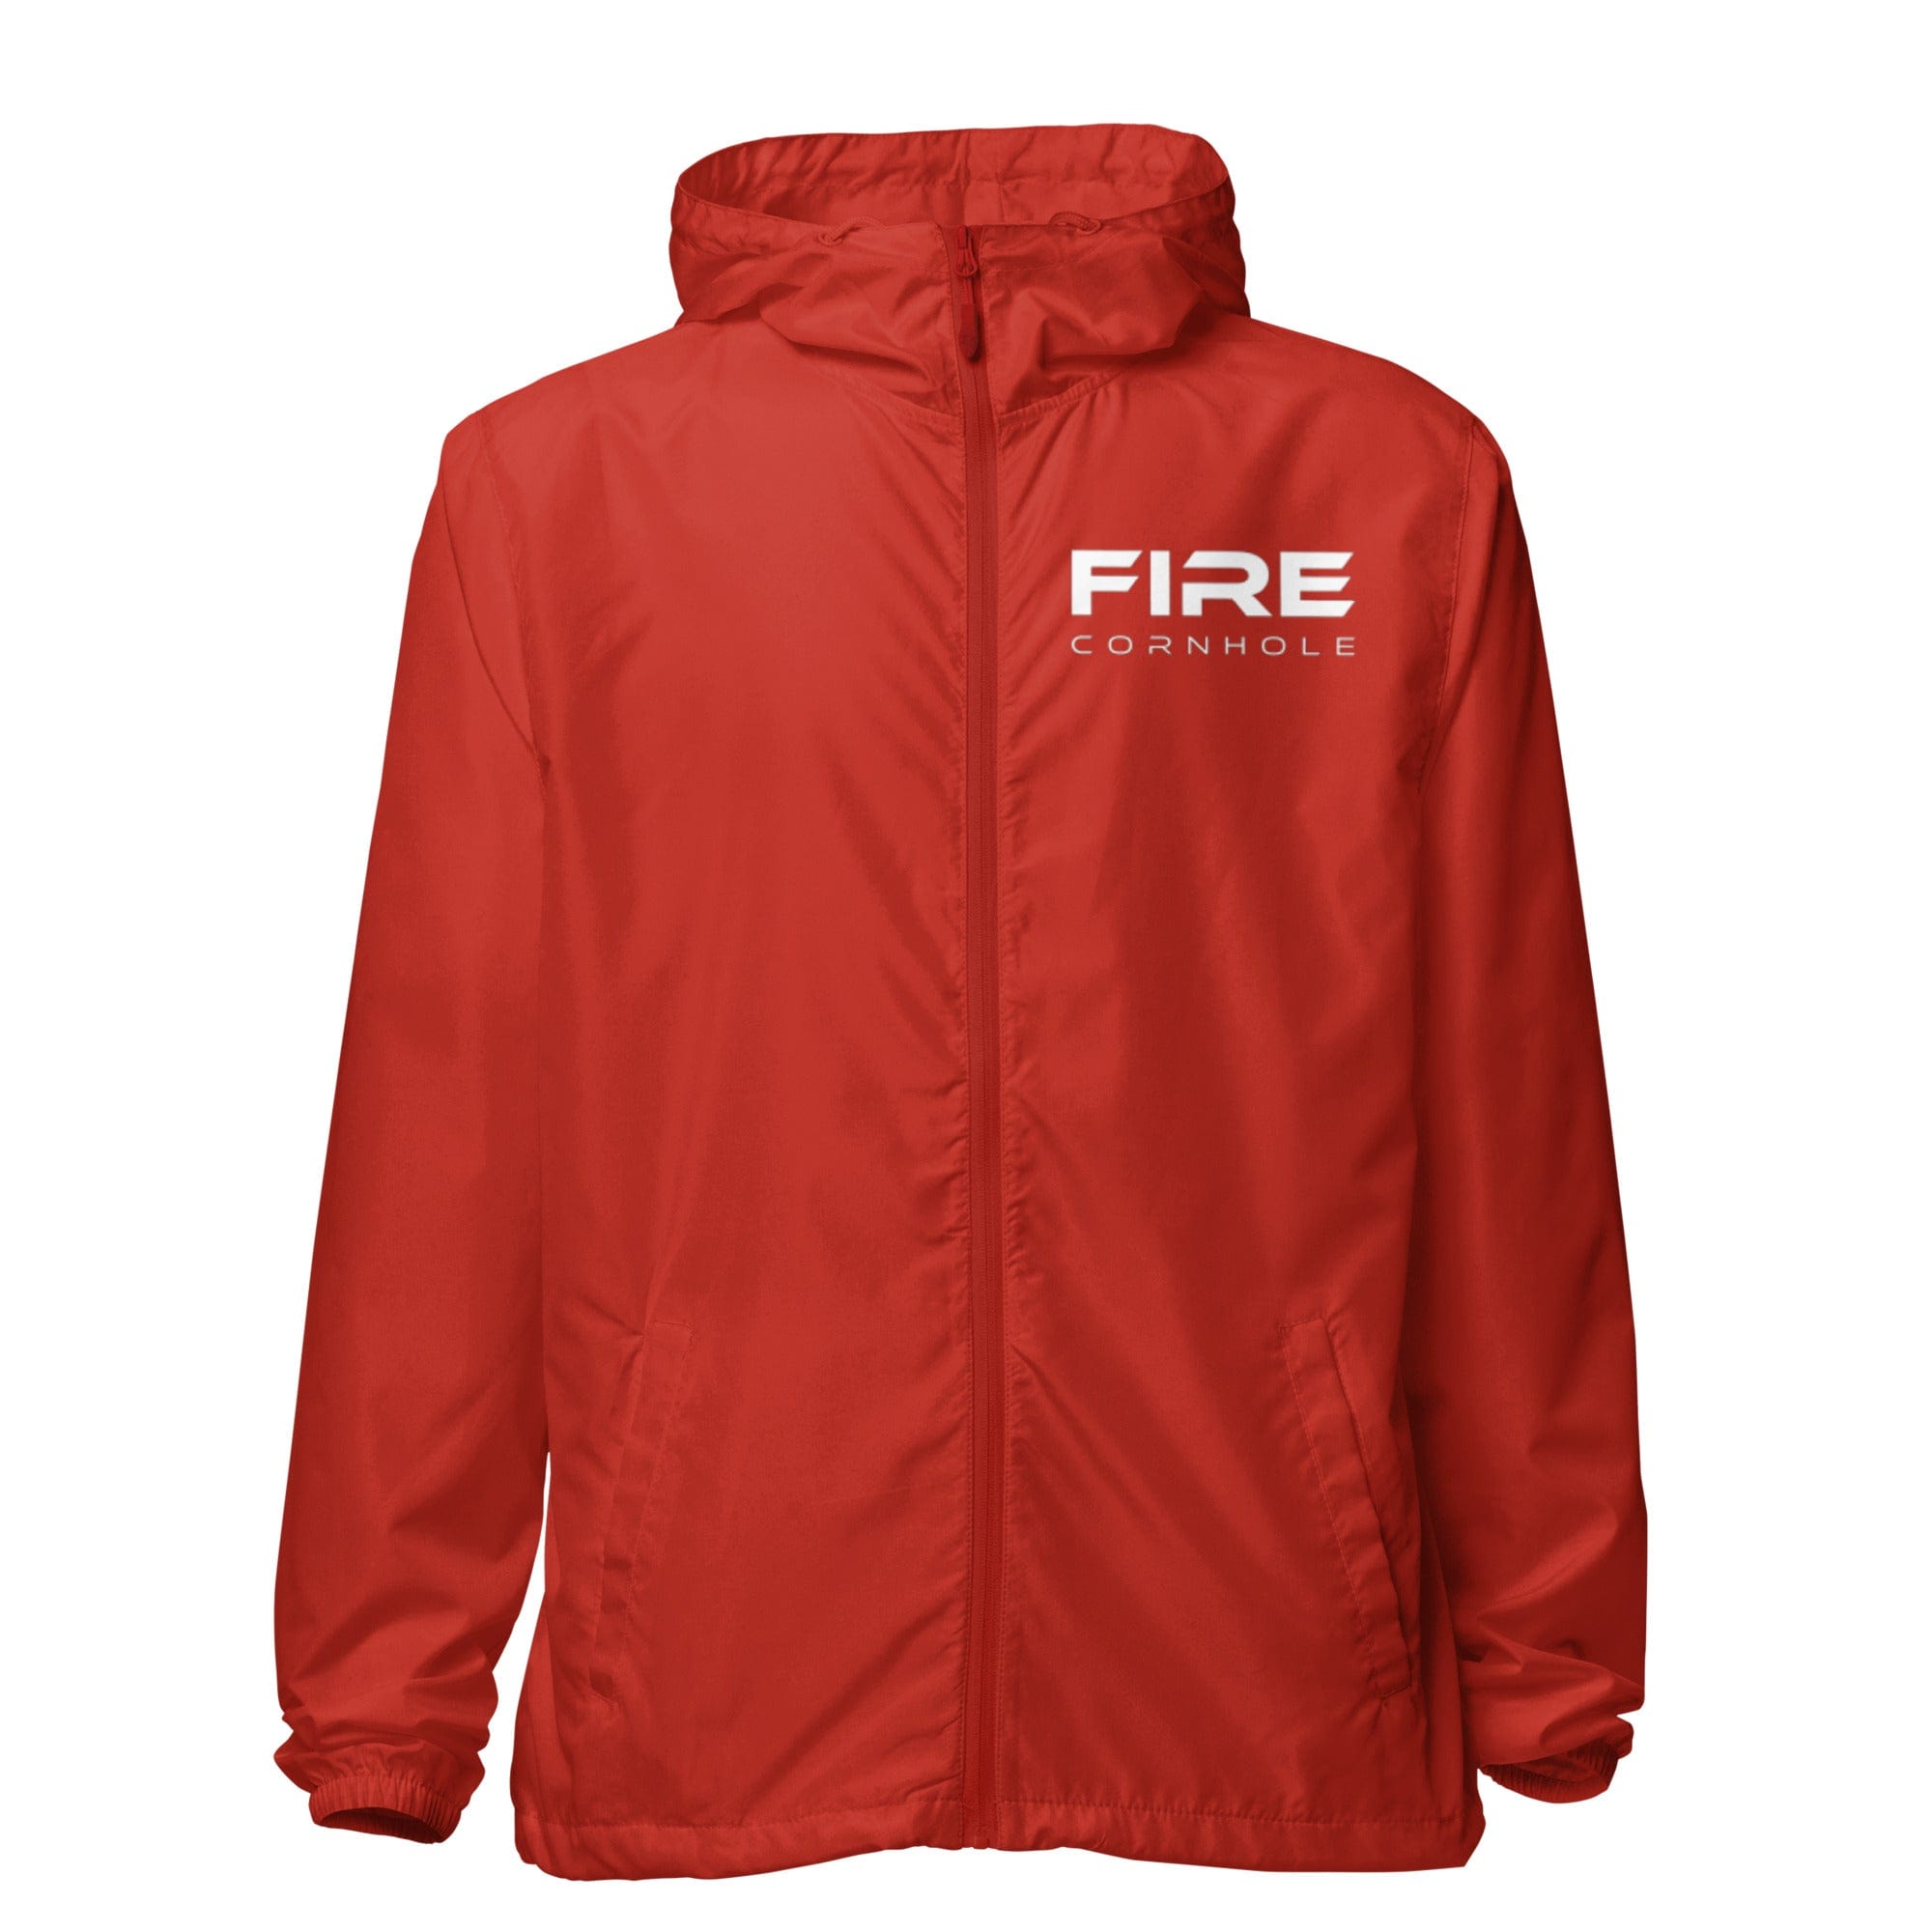 Front view of red unisex zip-up windbreaker with Fire cornhole logo in white